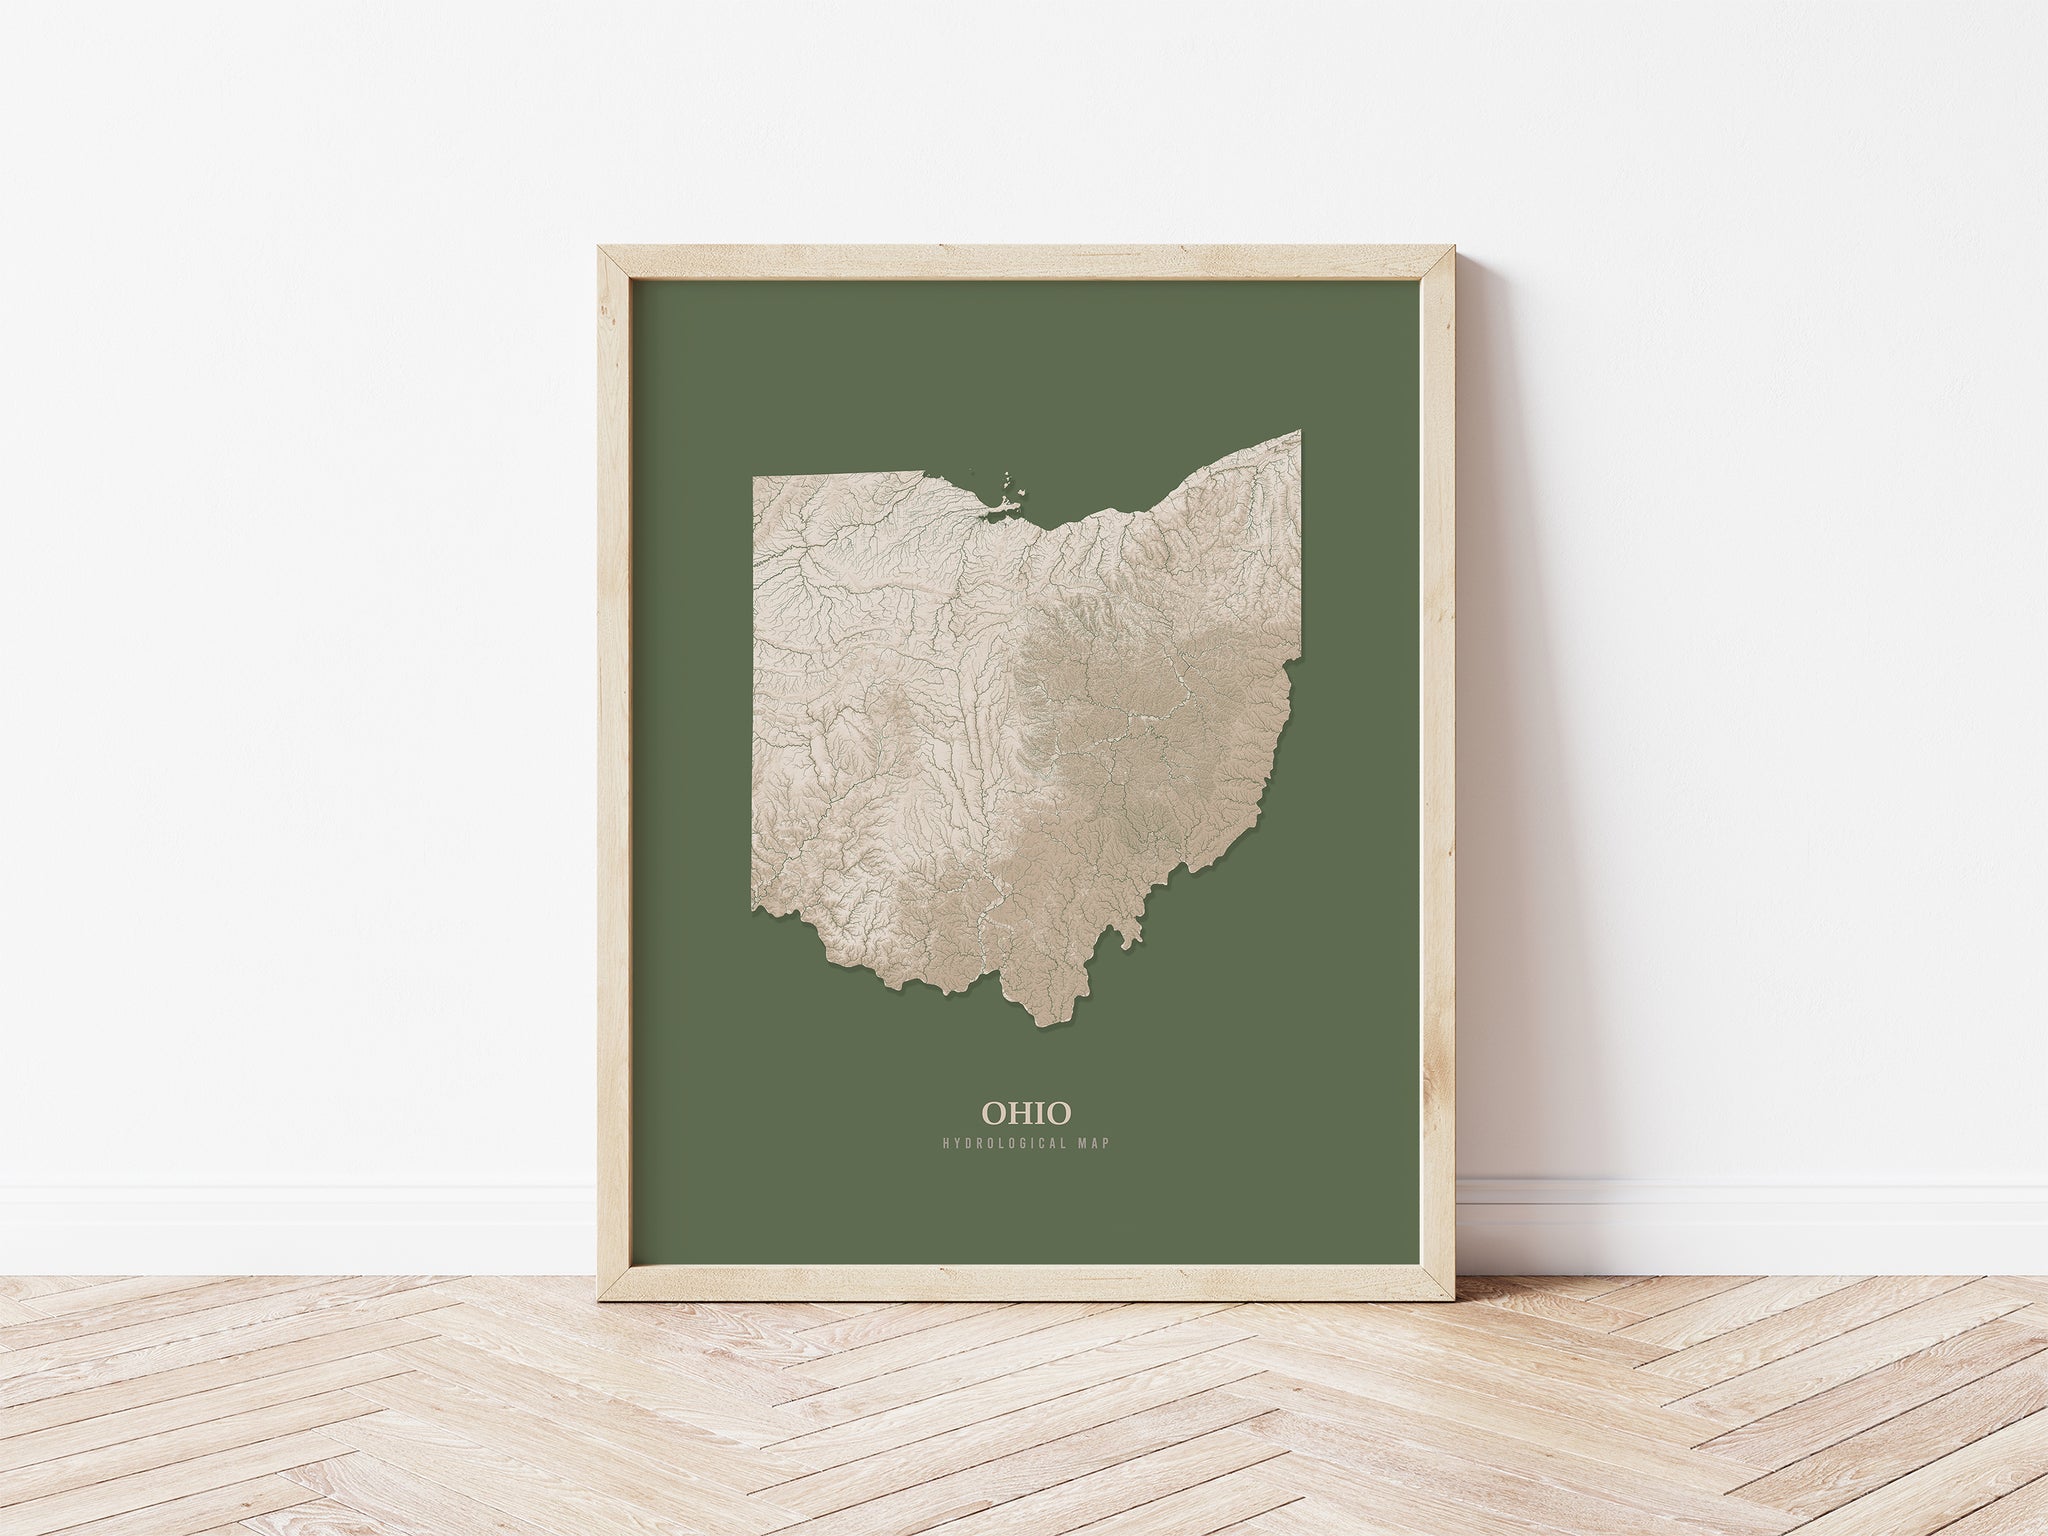 Ohio Hydrological Map Poster Green